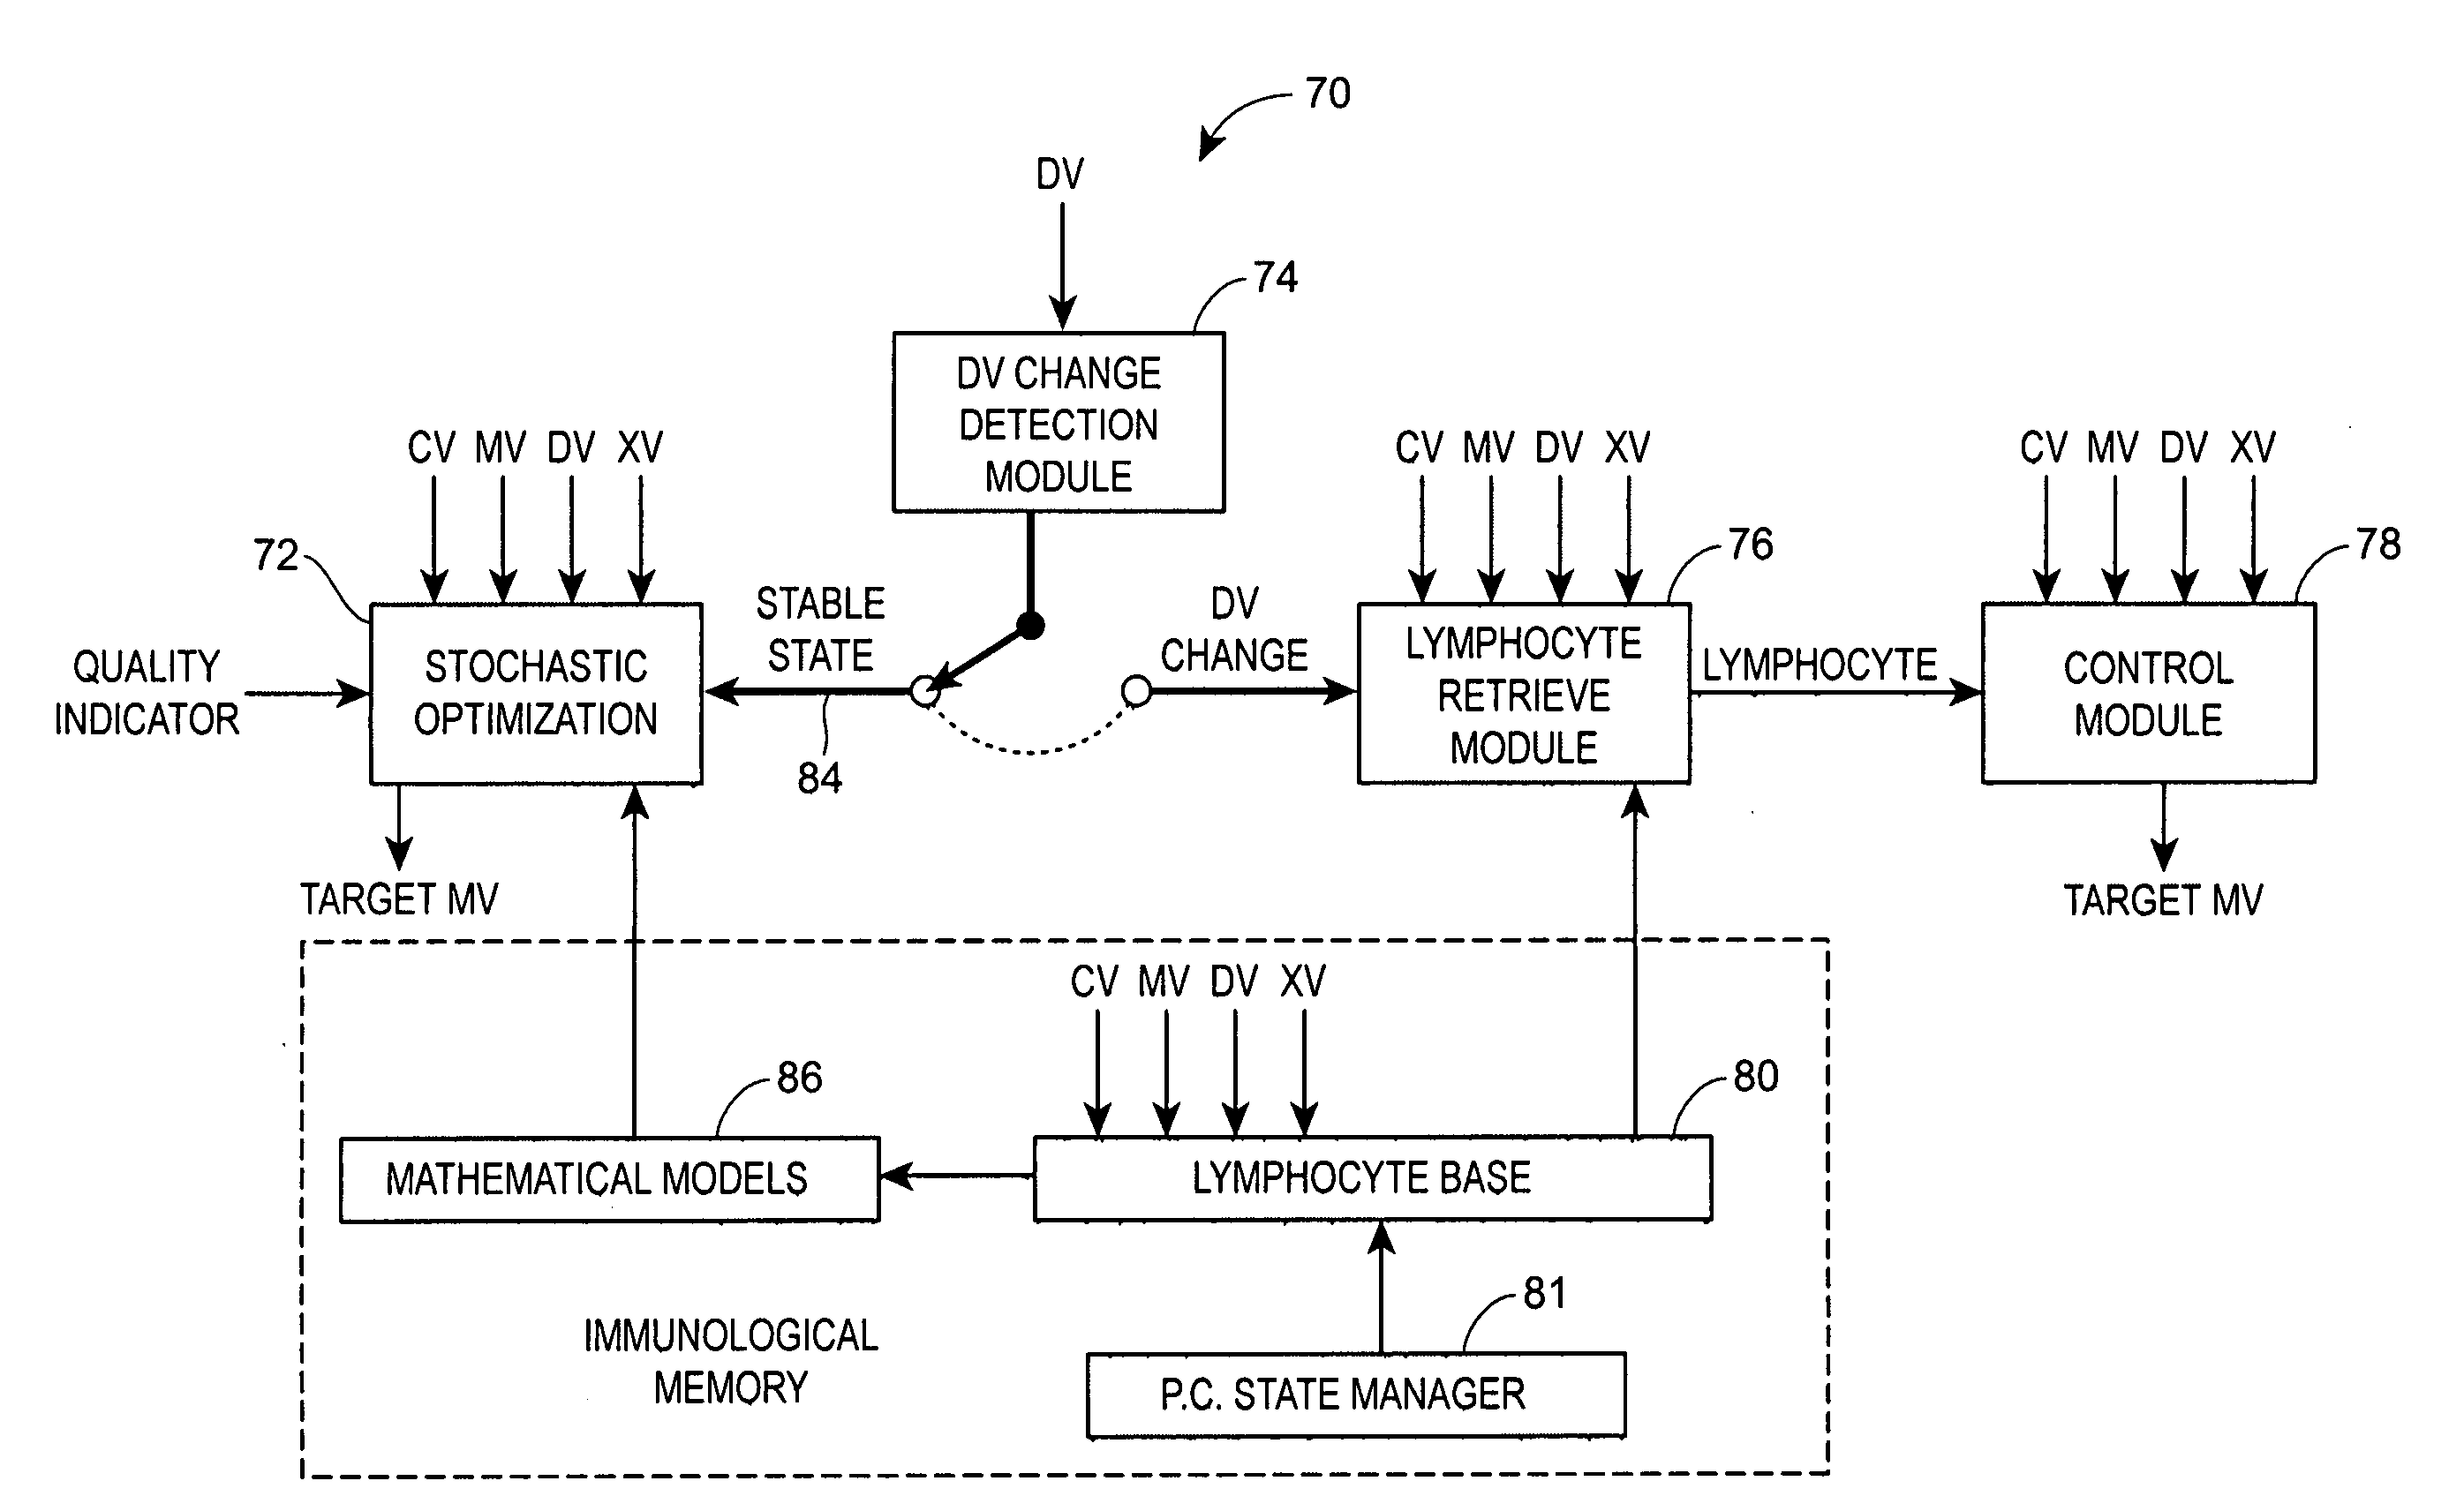 Process control and optimization technique using immunological concepts